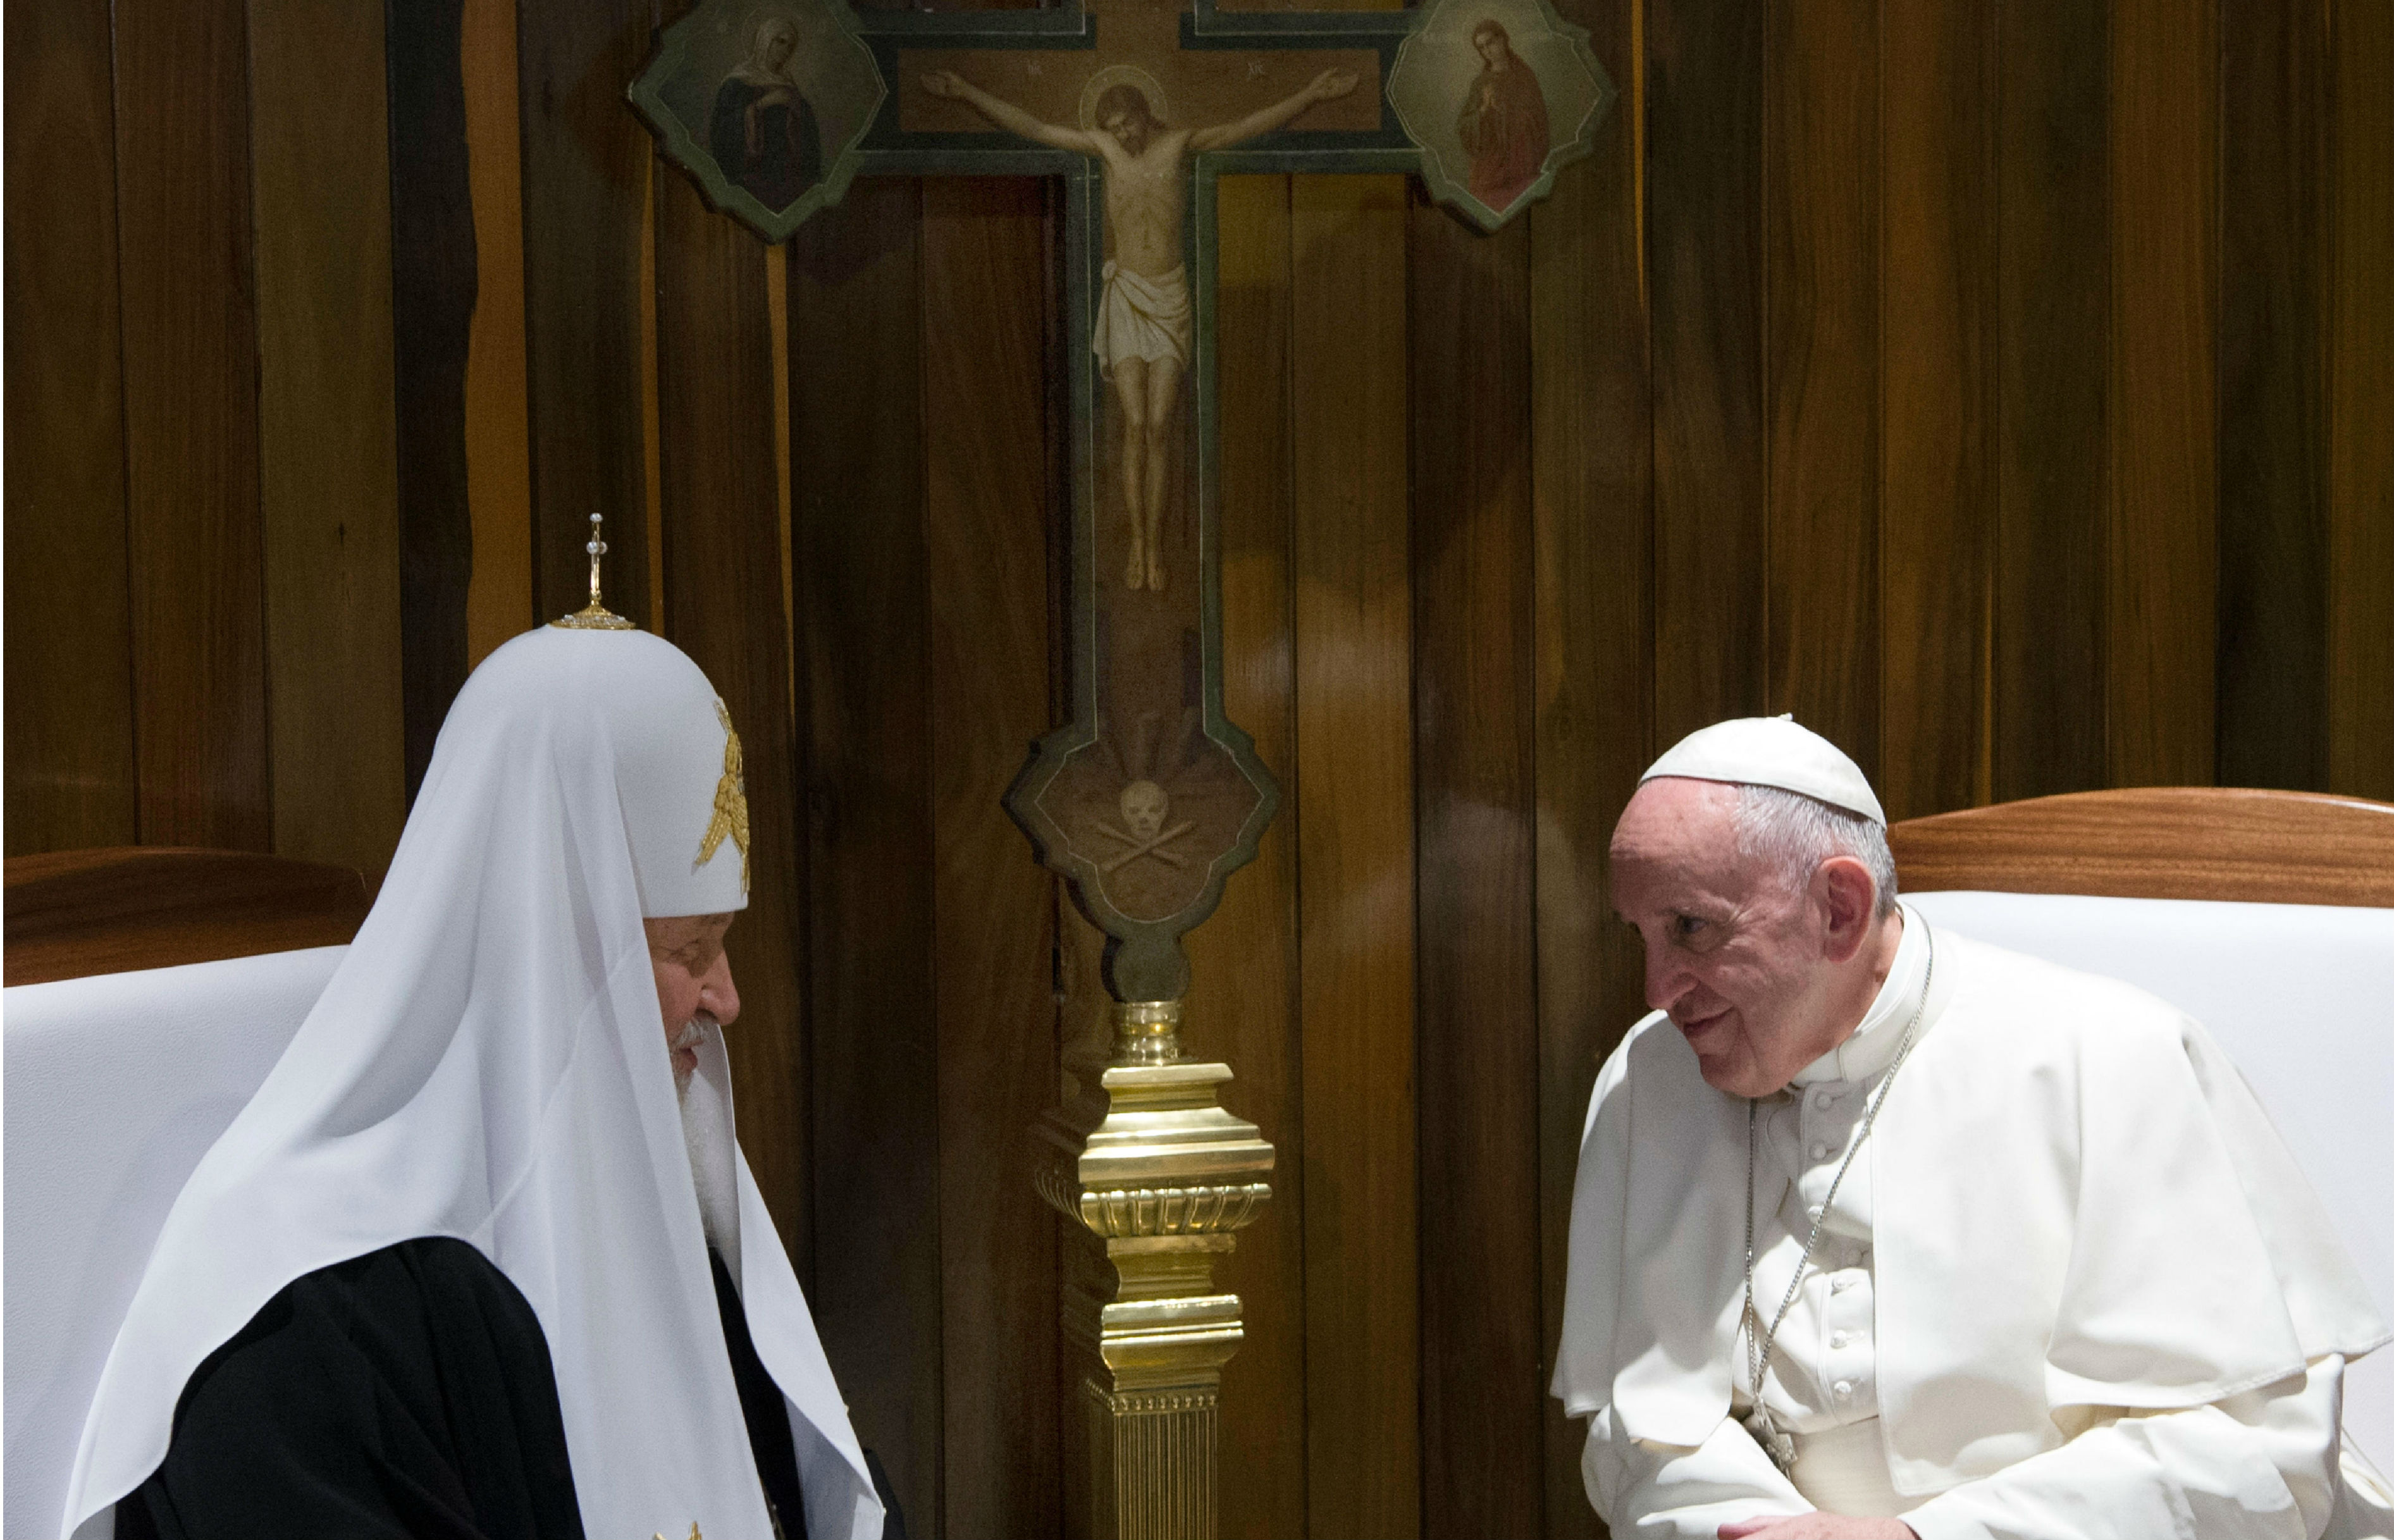 Churches can offer ‘different perspective’ on Russian British relationship, says Patriarch